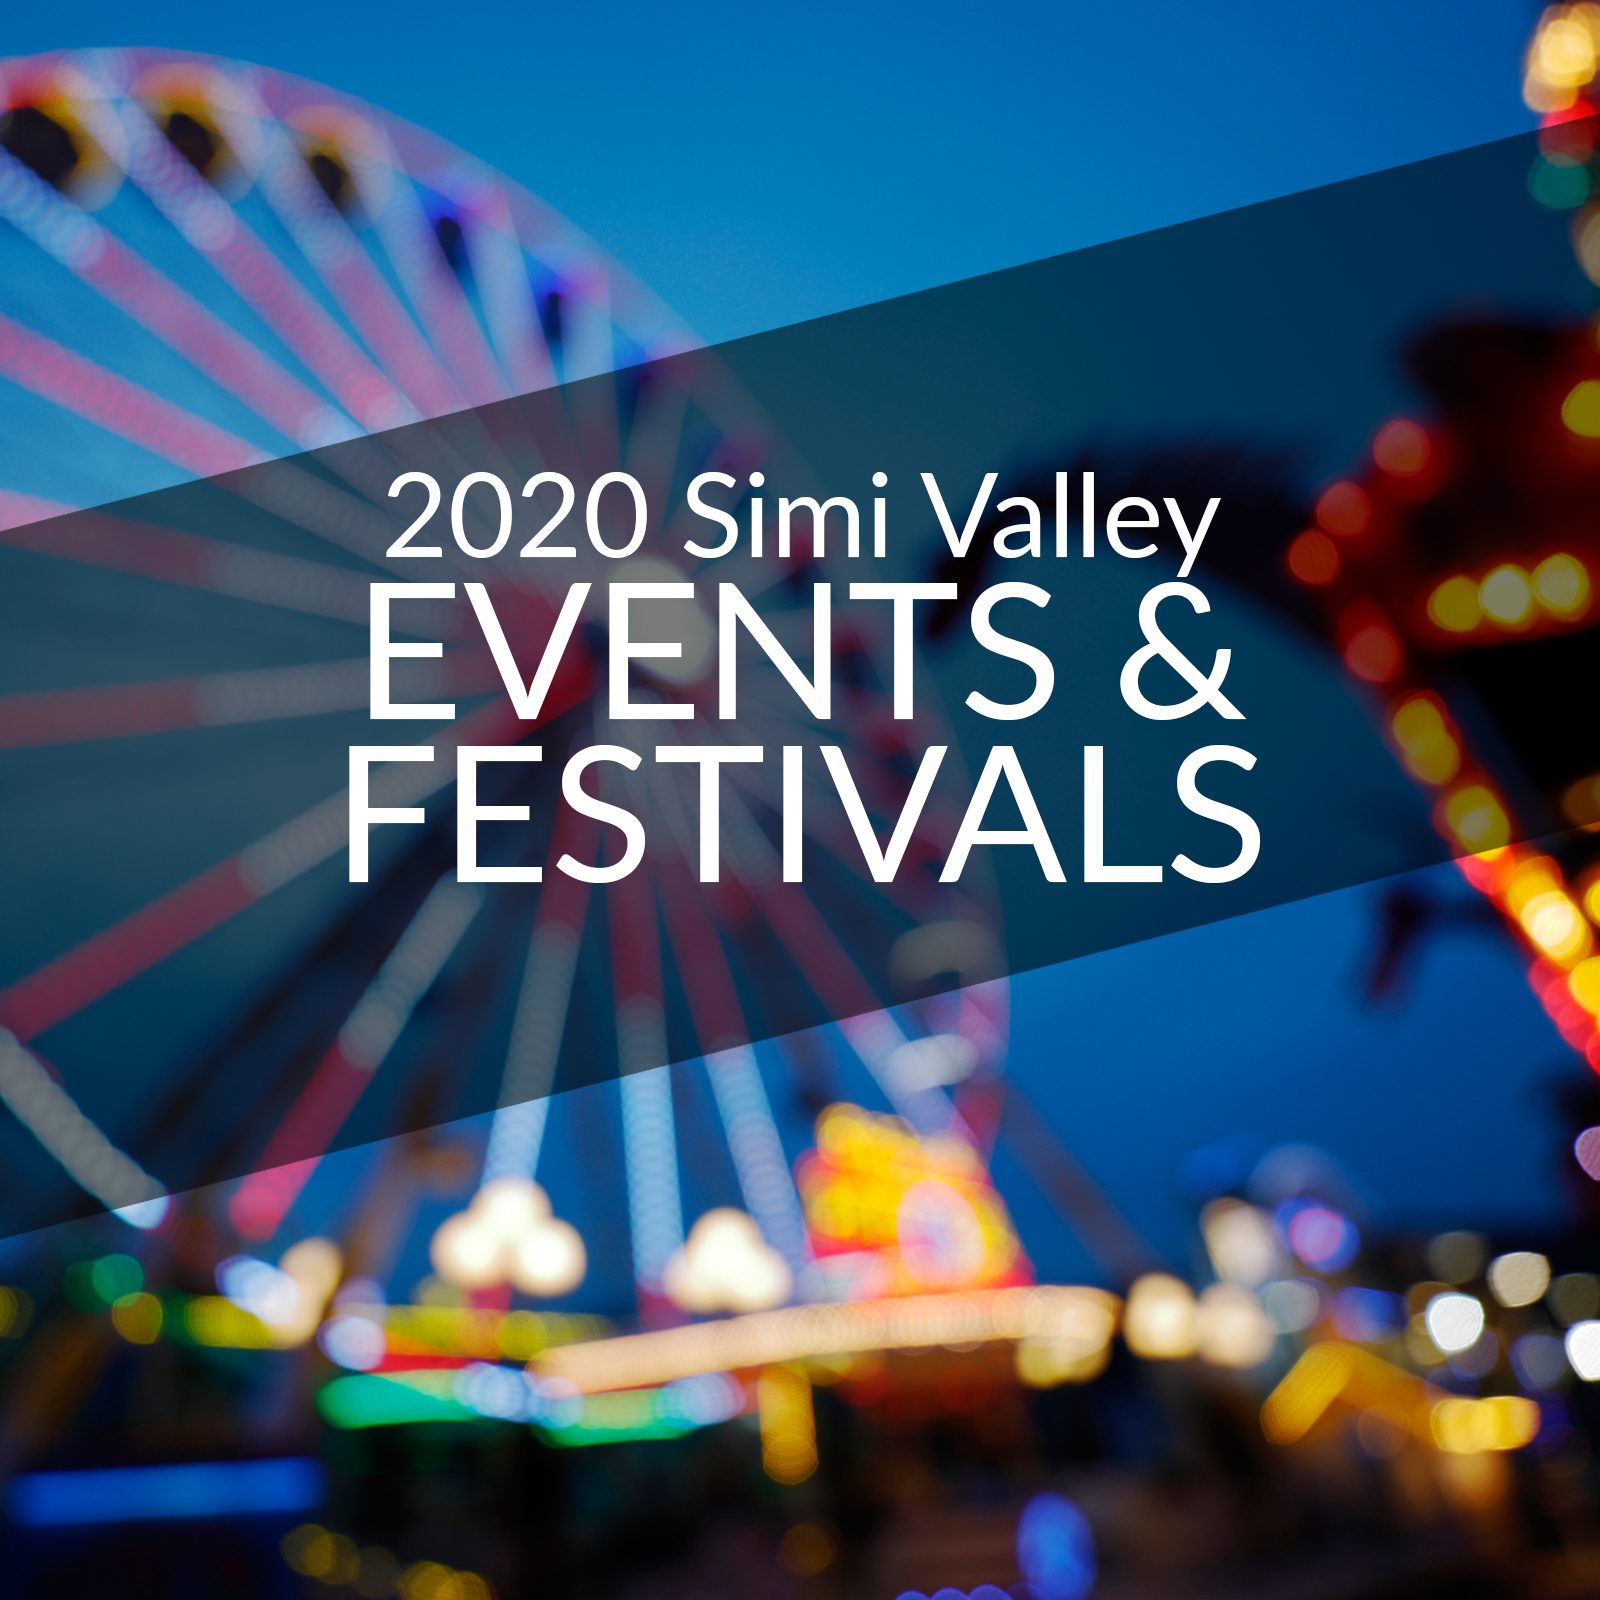 Events Festivals 2020 Simi Valley